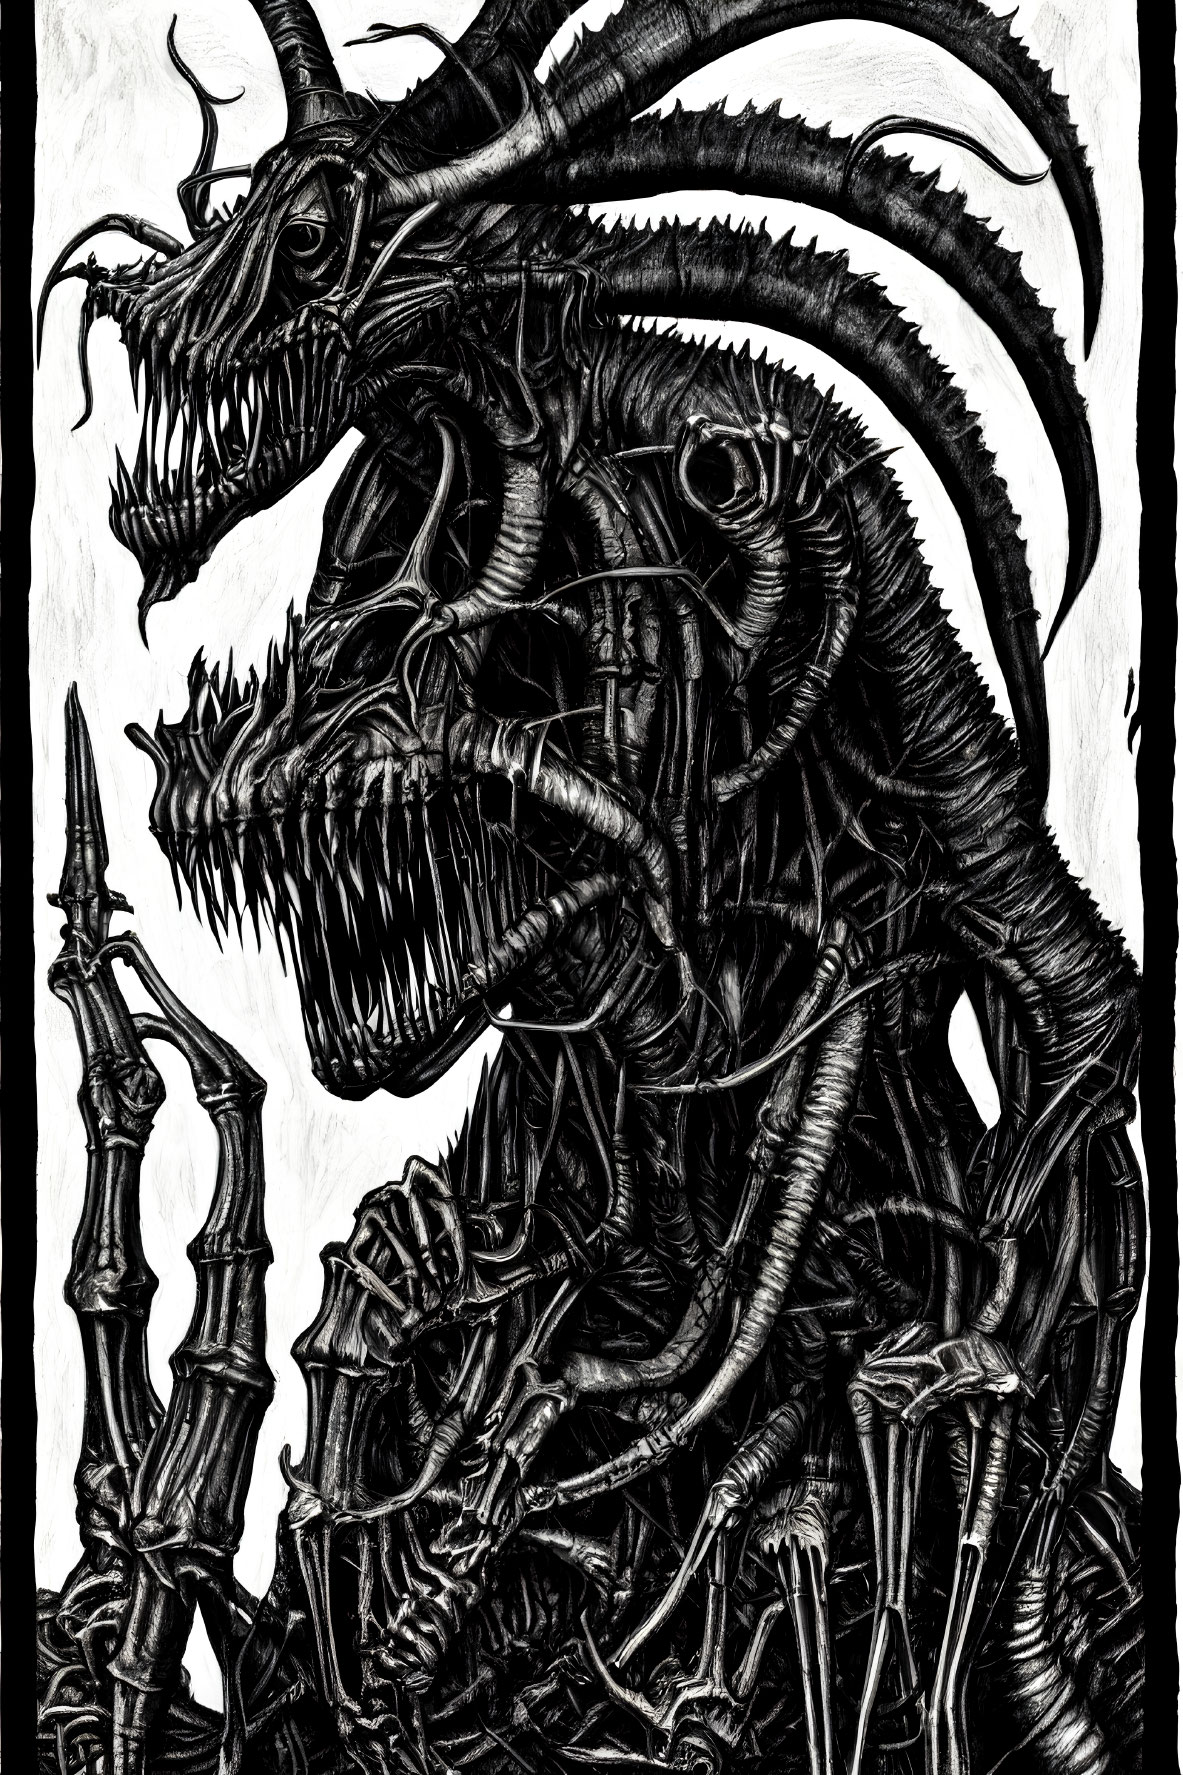 Detailed black and white illustration of fearsome creature with horns, teeth, and staff